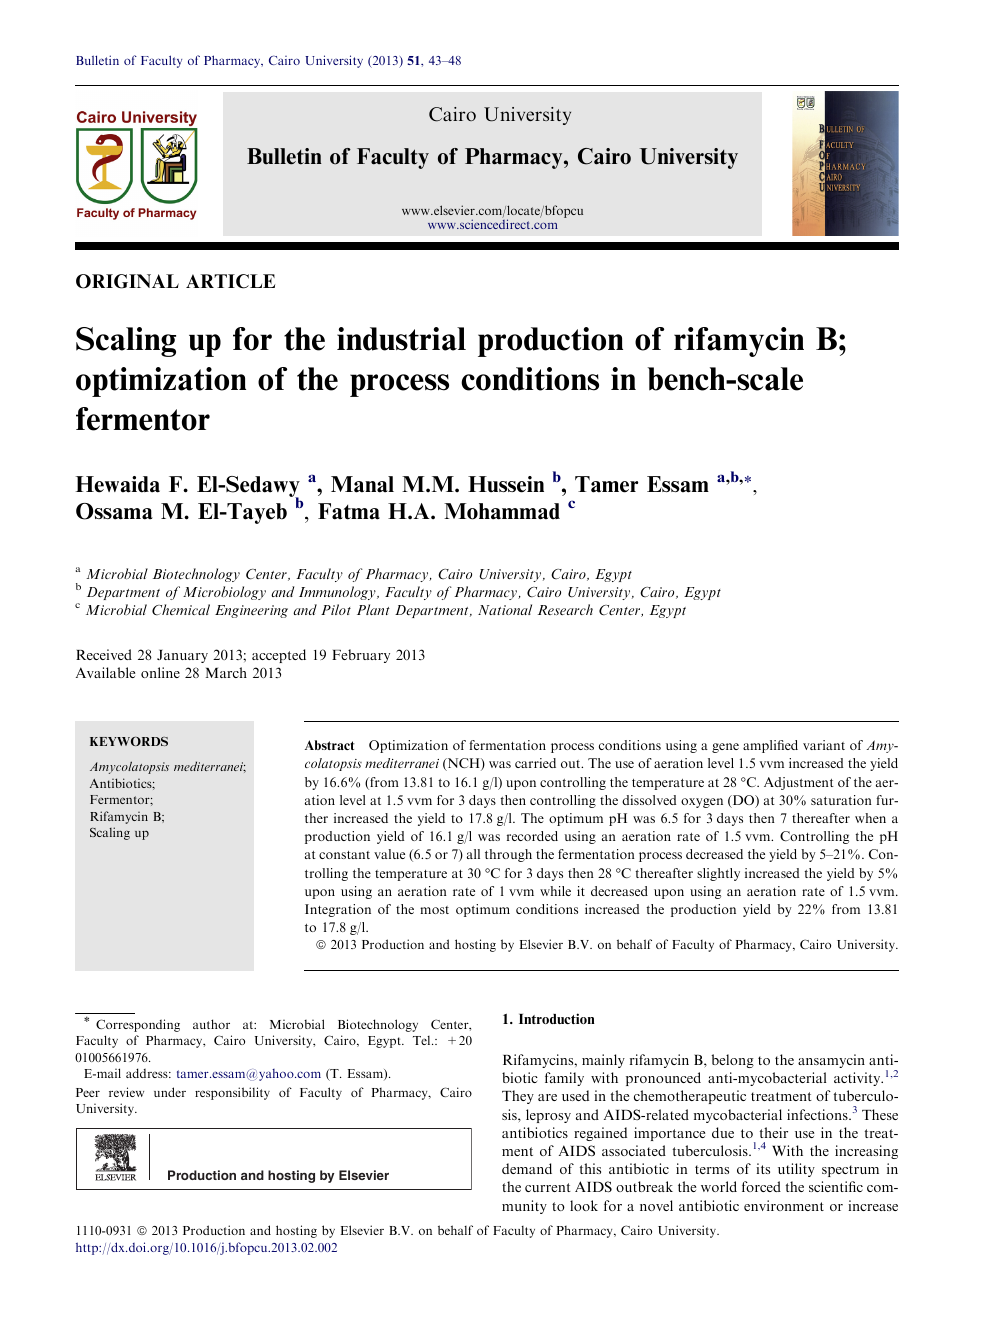 Scaling Up For The Industrial Production Of Rifamycin B Optimization Of The Process Conditions In Bench Scale Fermentor Topic Of Research Paper In Chemical Engineering Download Scholarly Article Pdf And Read For